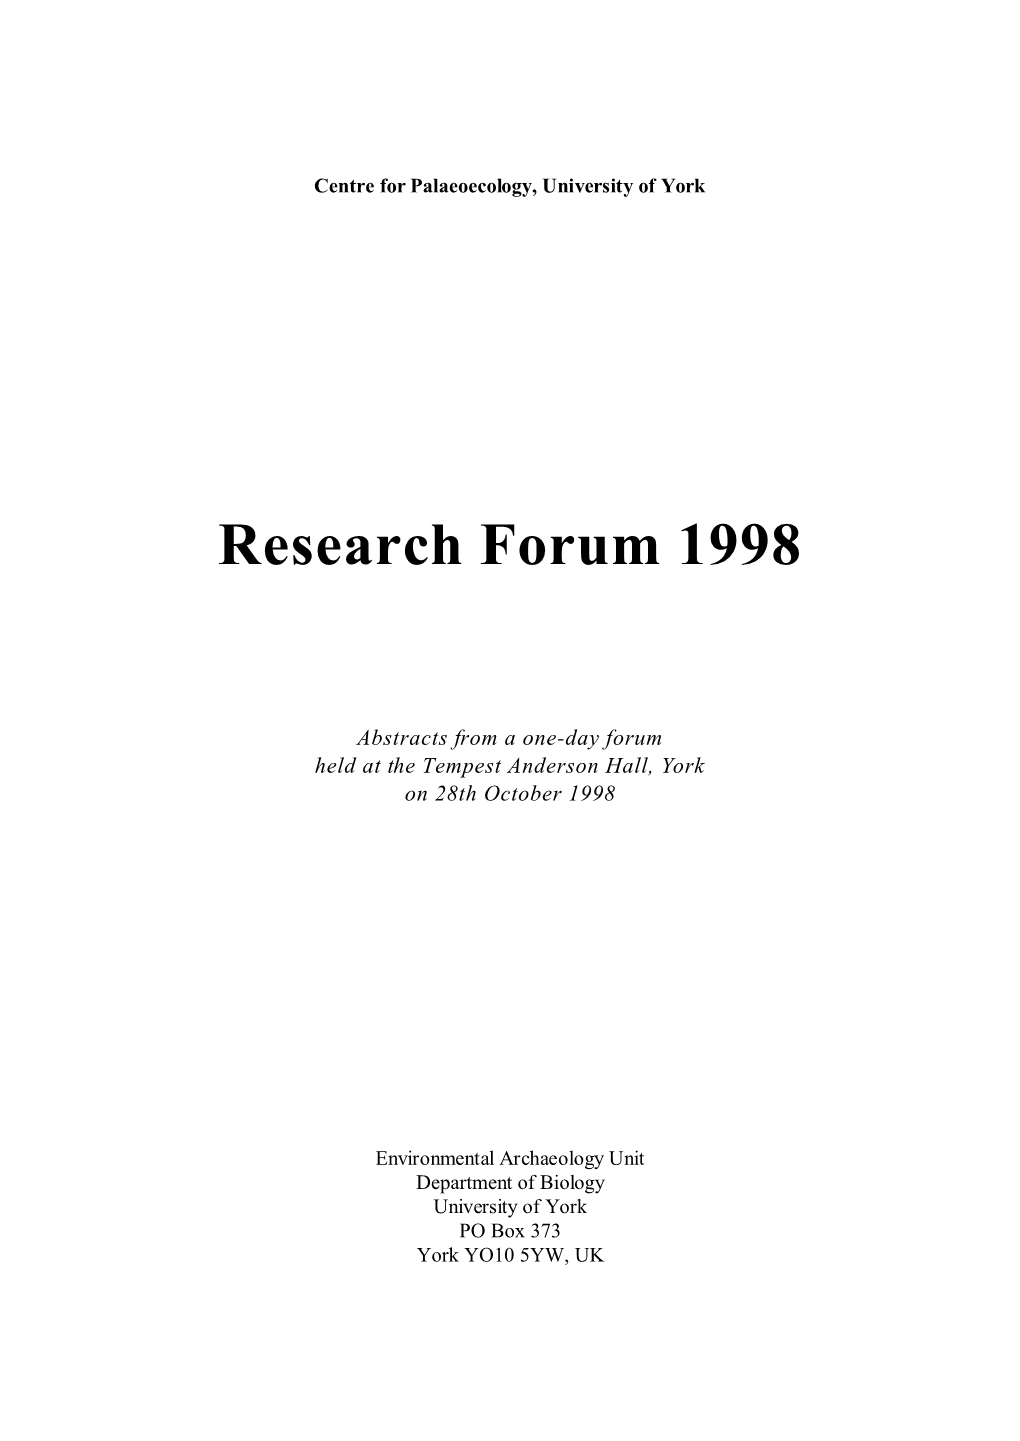 Research Forum 1998